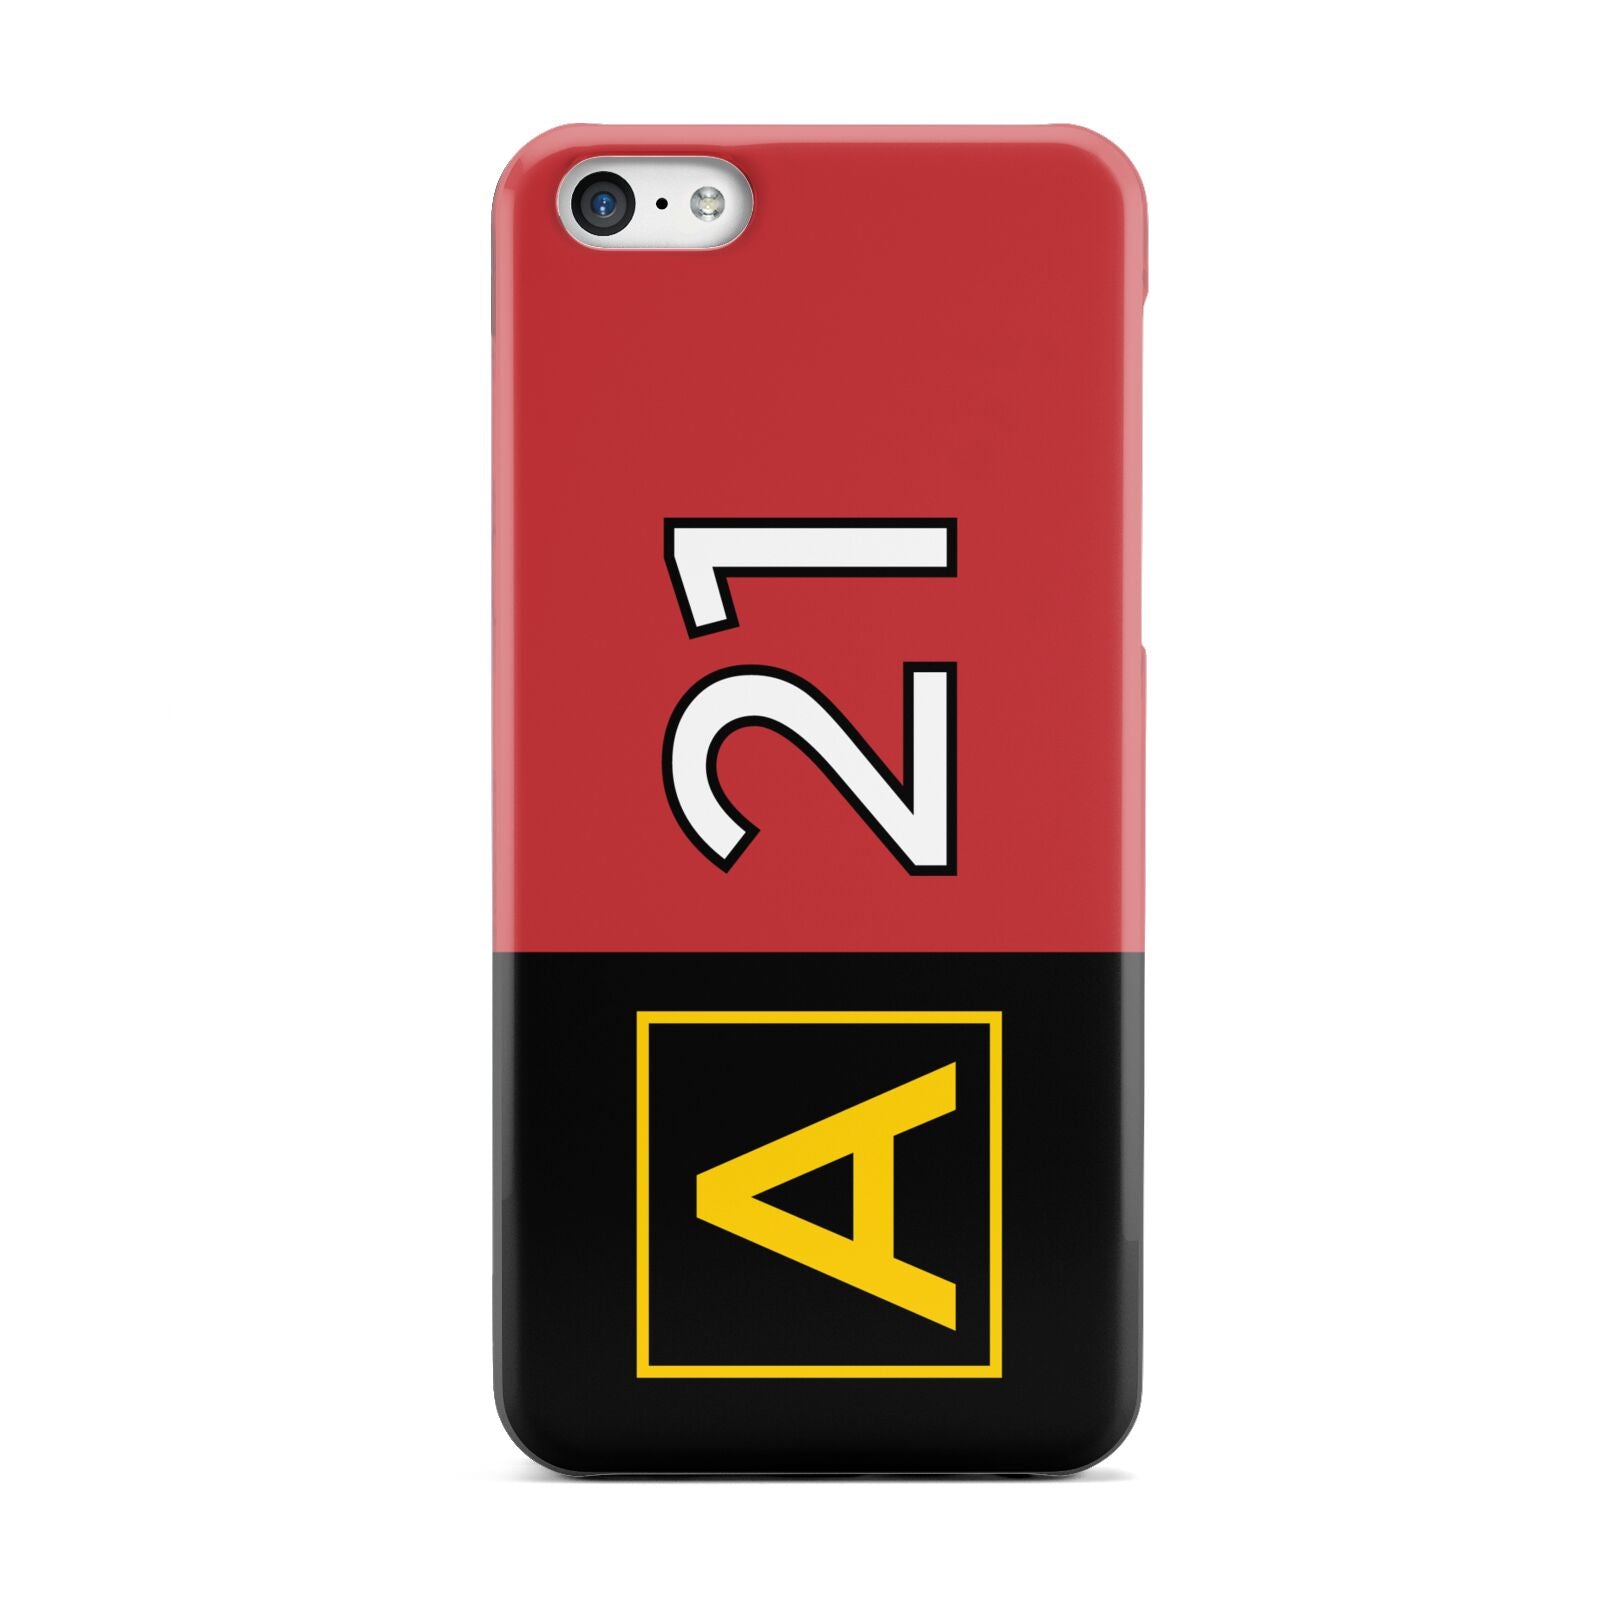 Custom Runway Location and Hold Position Apple iPhone 5c Case